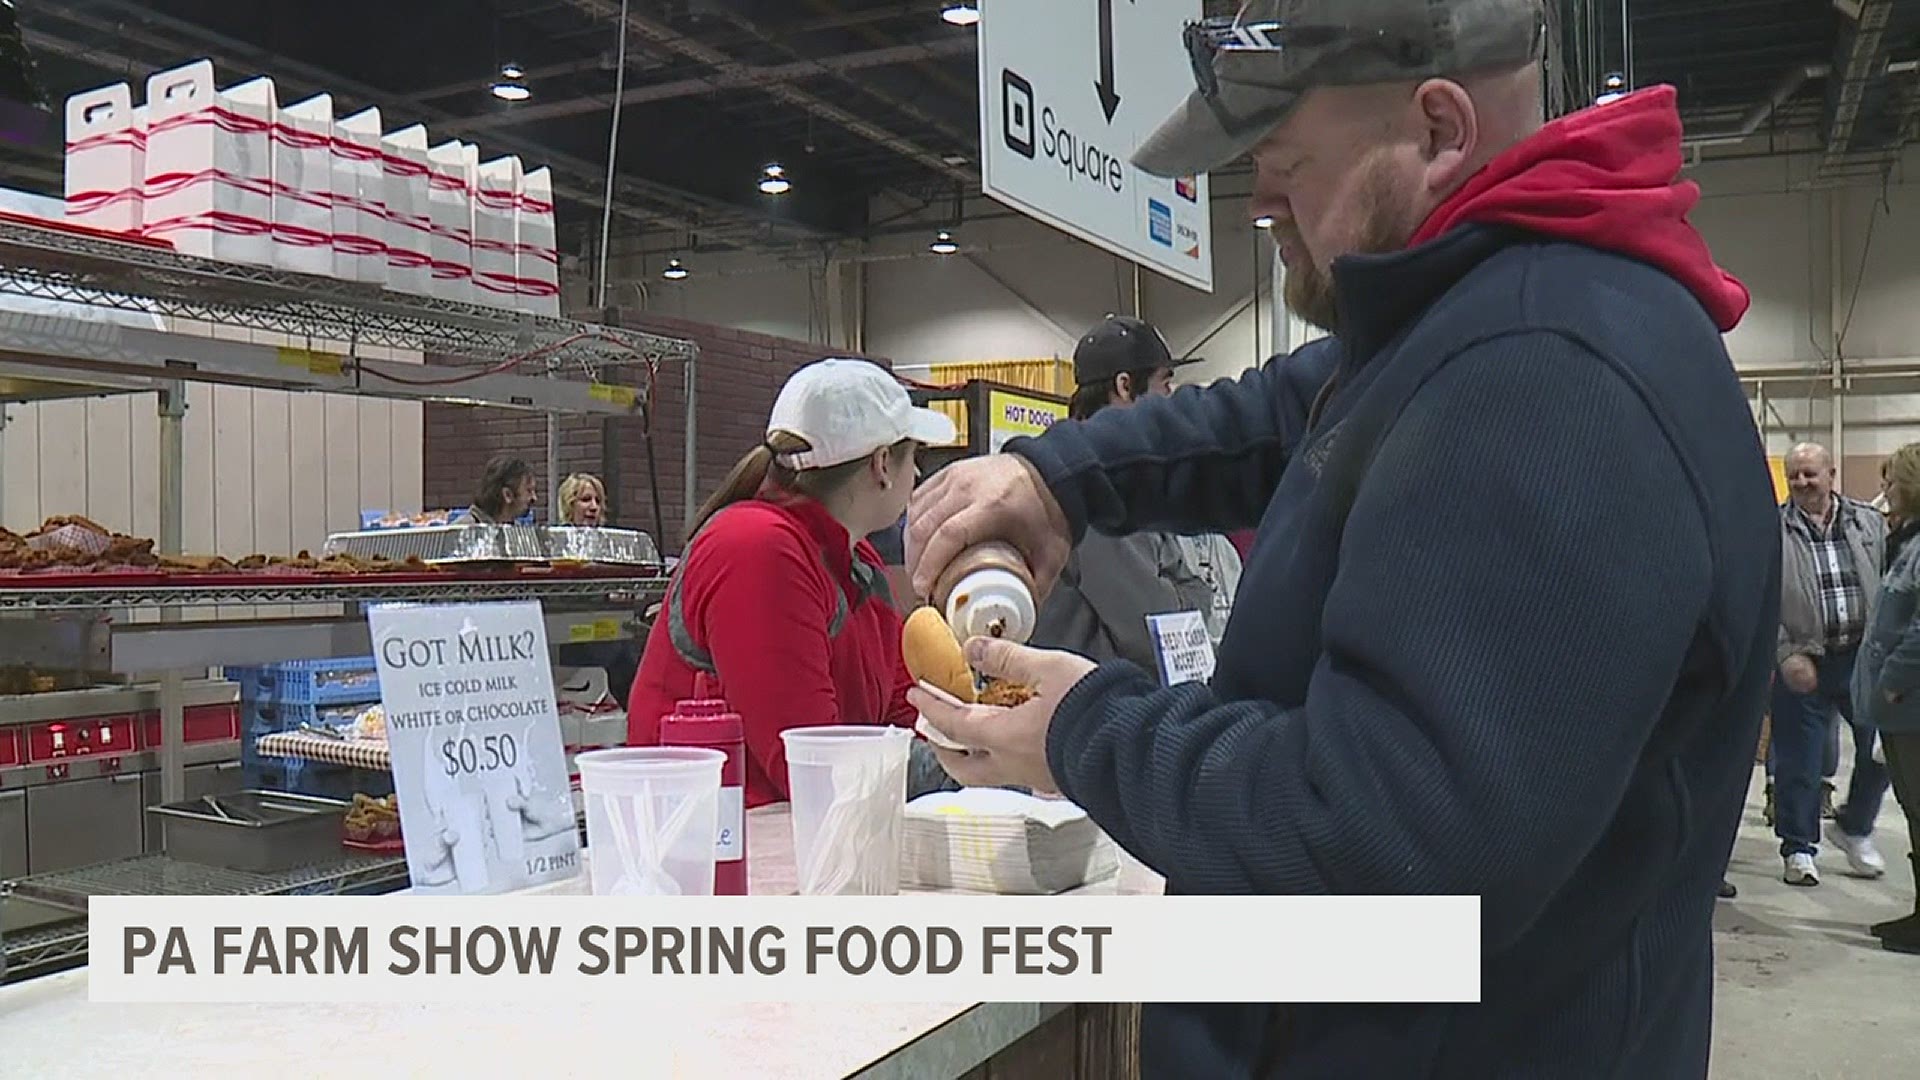 The outdoor event will feature Farm Show favorite foods and drinks.